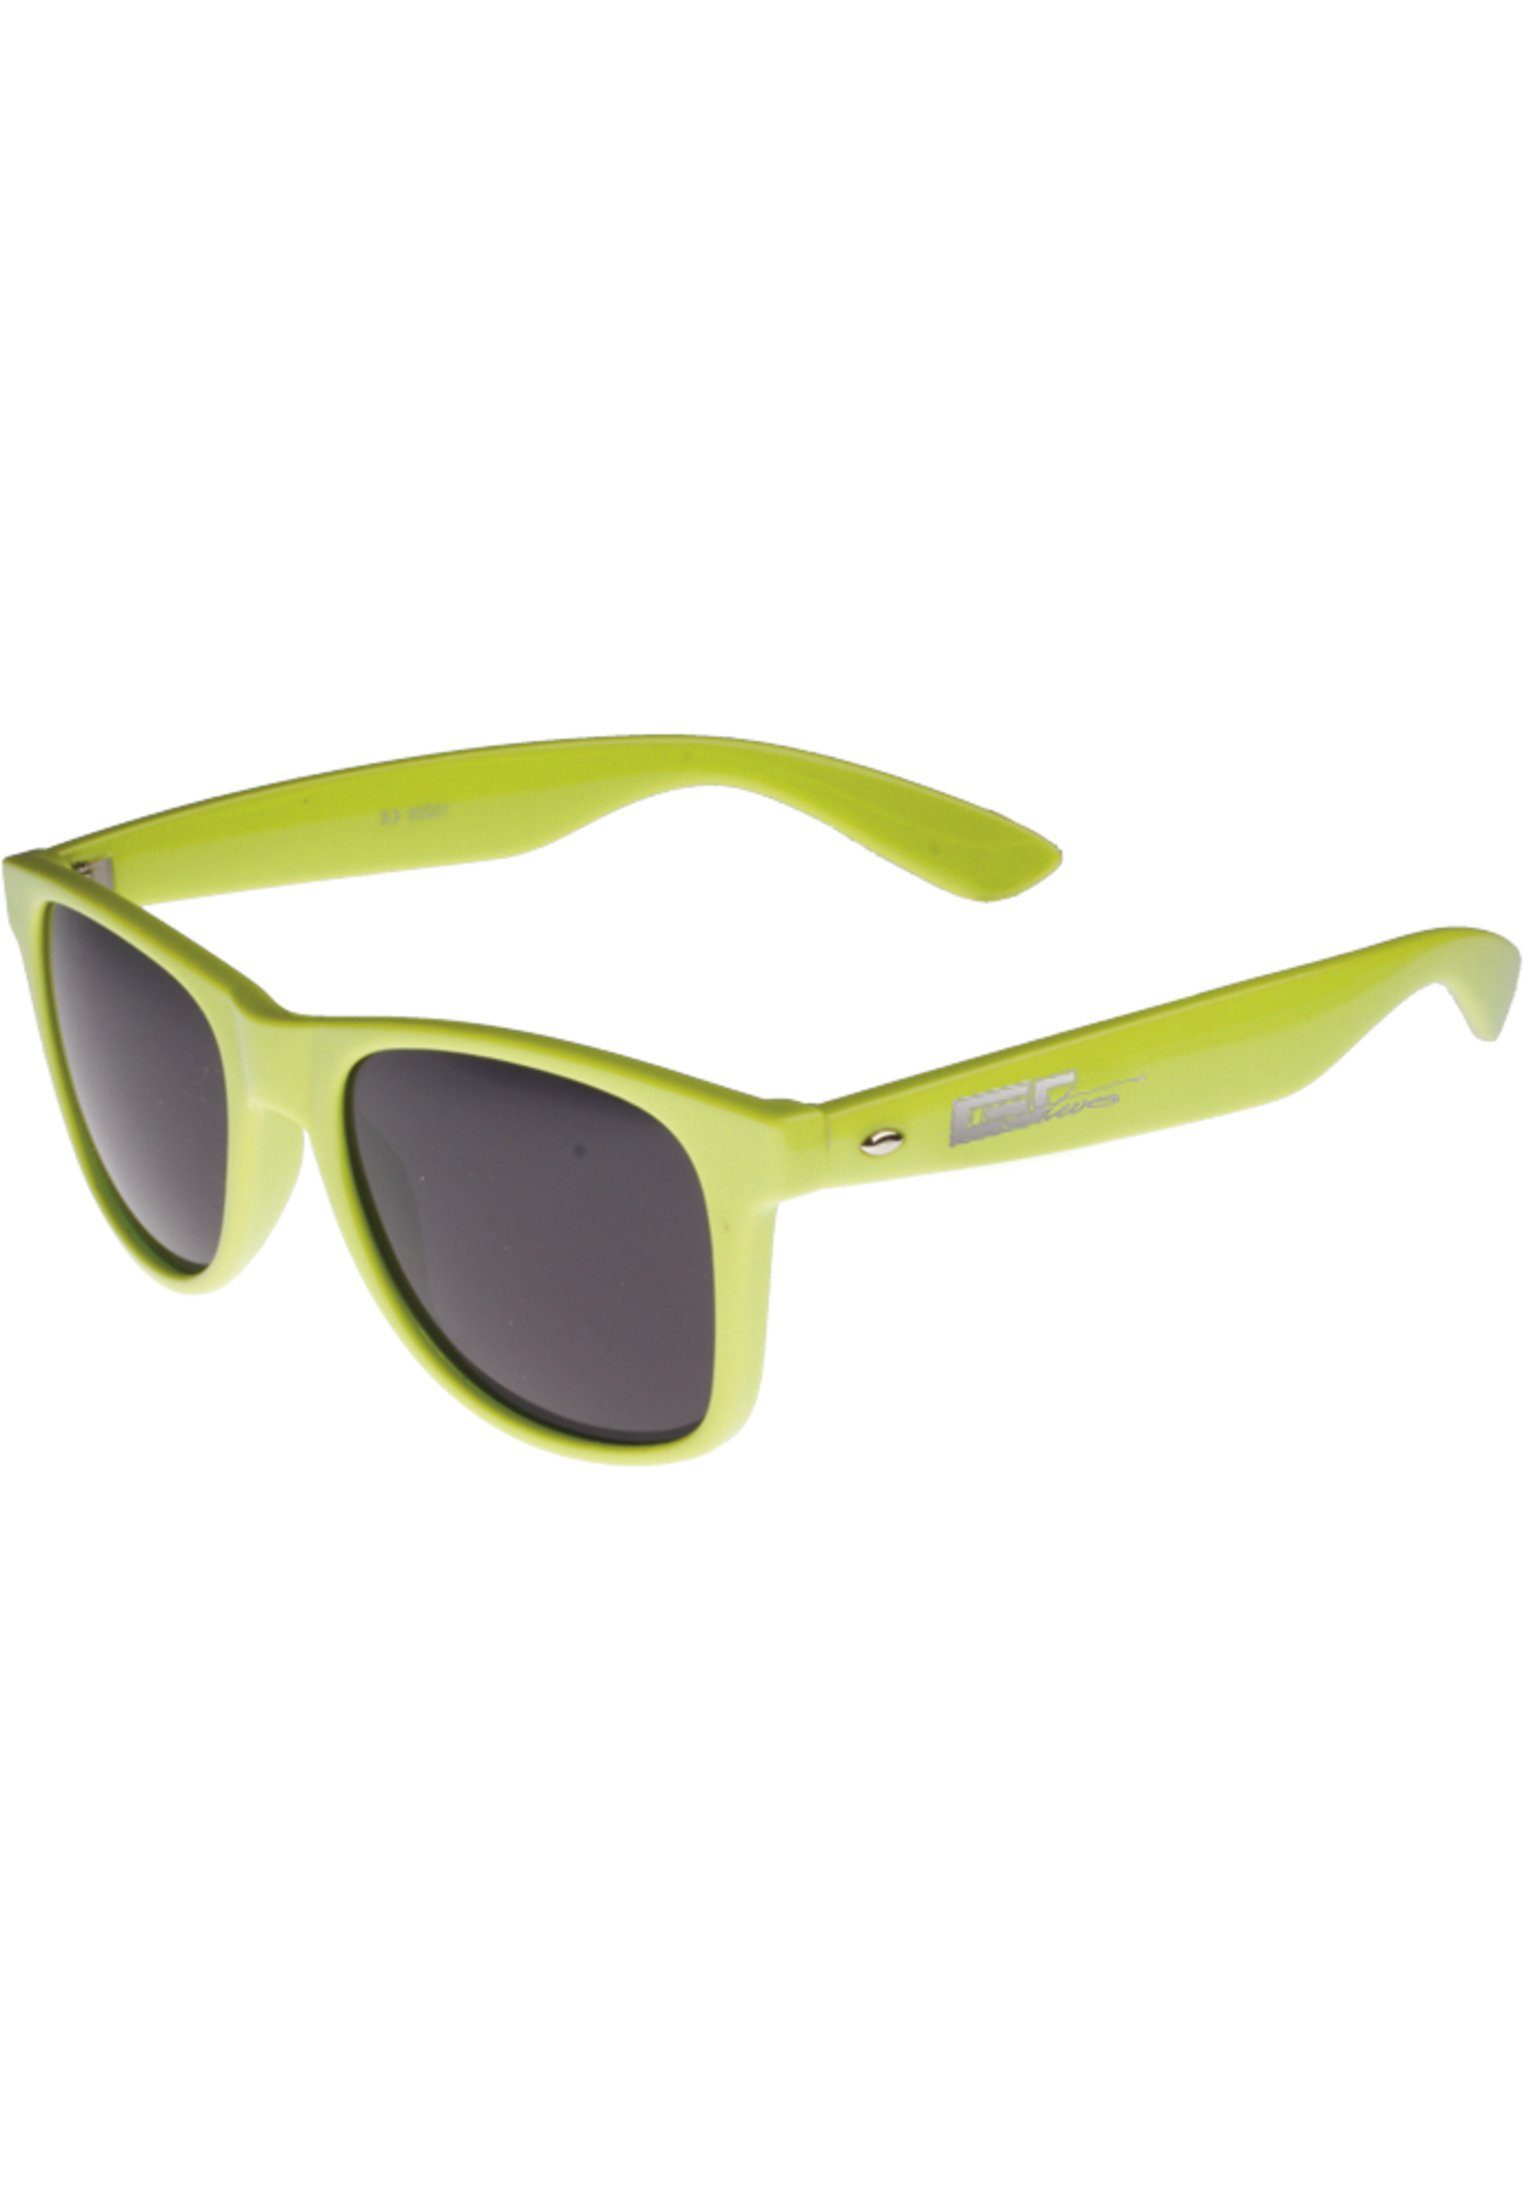 MSTRDS Sonnenbrille Accessoires Groove neongreen Shades GStwo